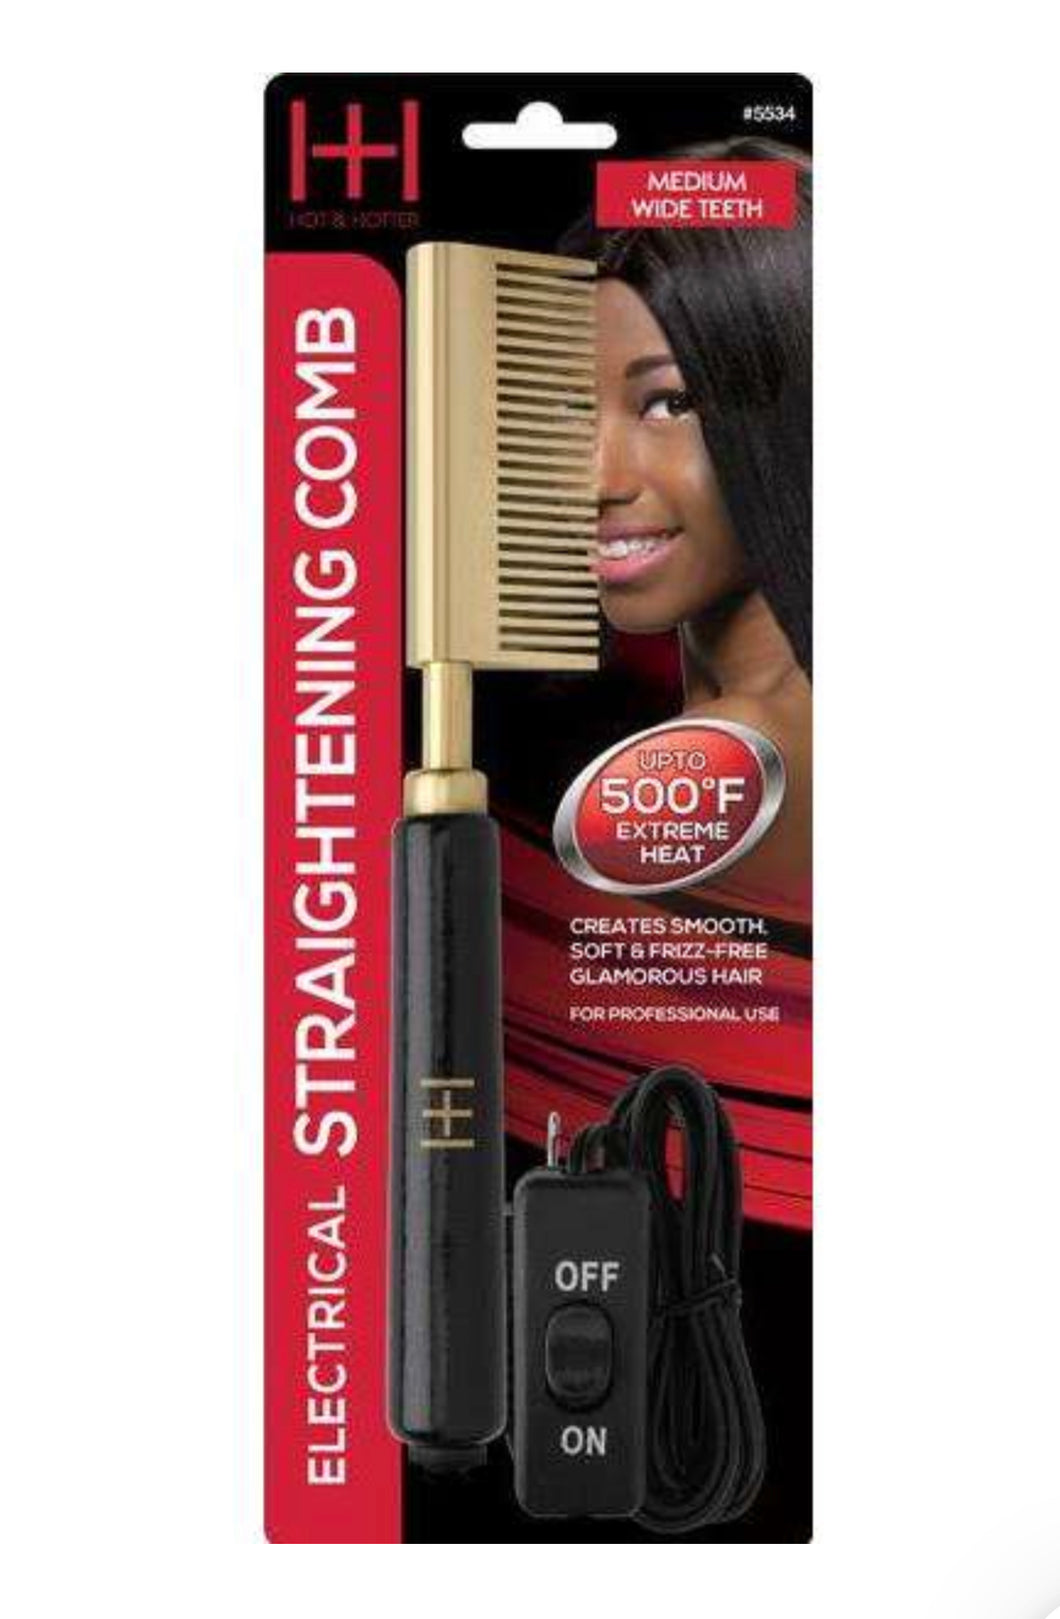 Annie Hot & Hotter Electrical Straightening Hot Comb Medium Wide Teeth